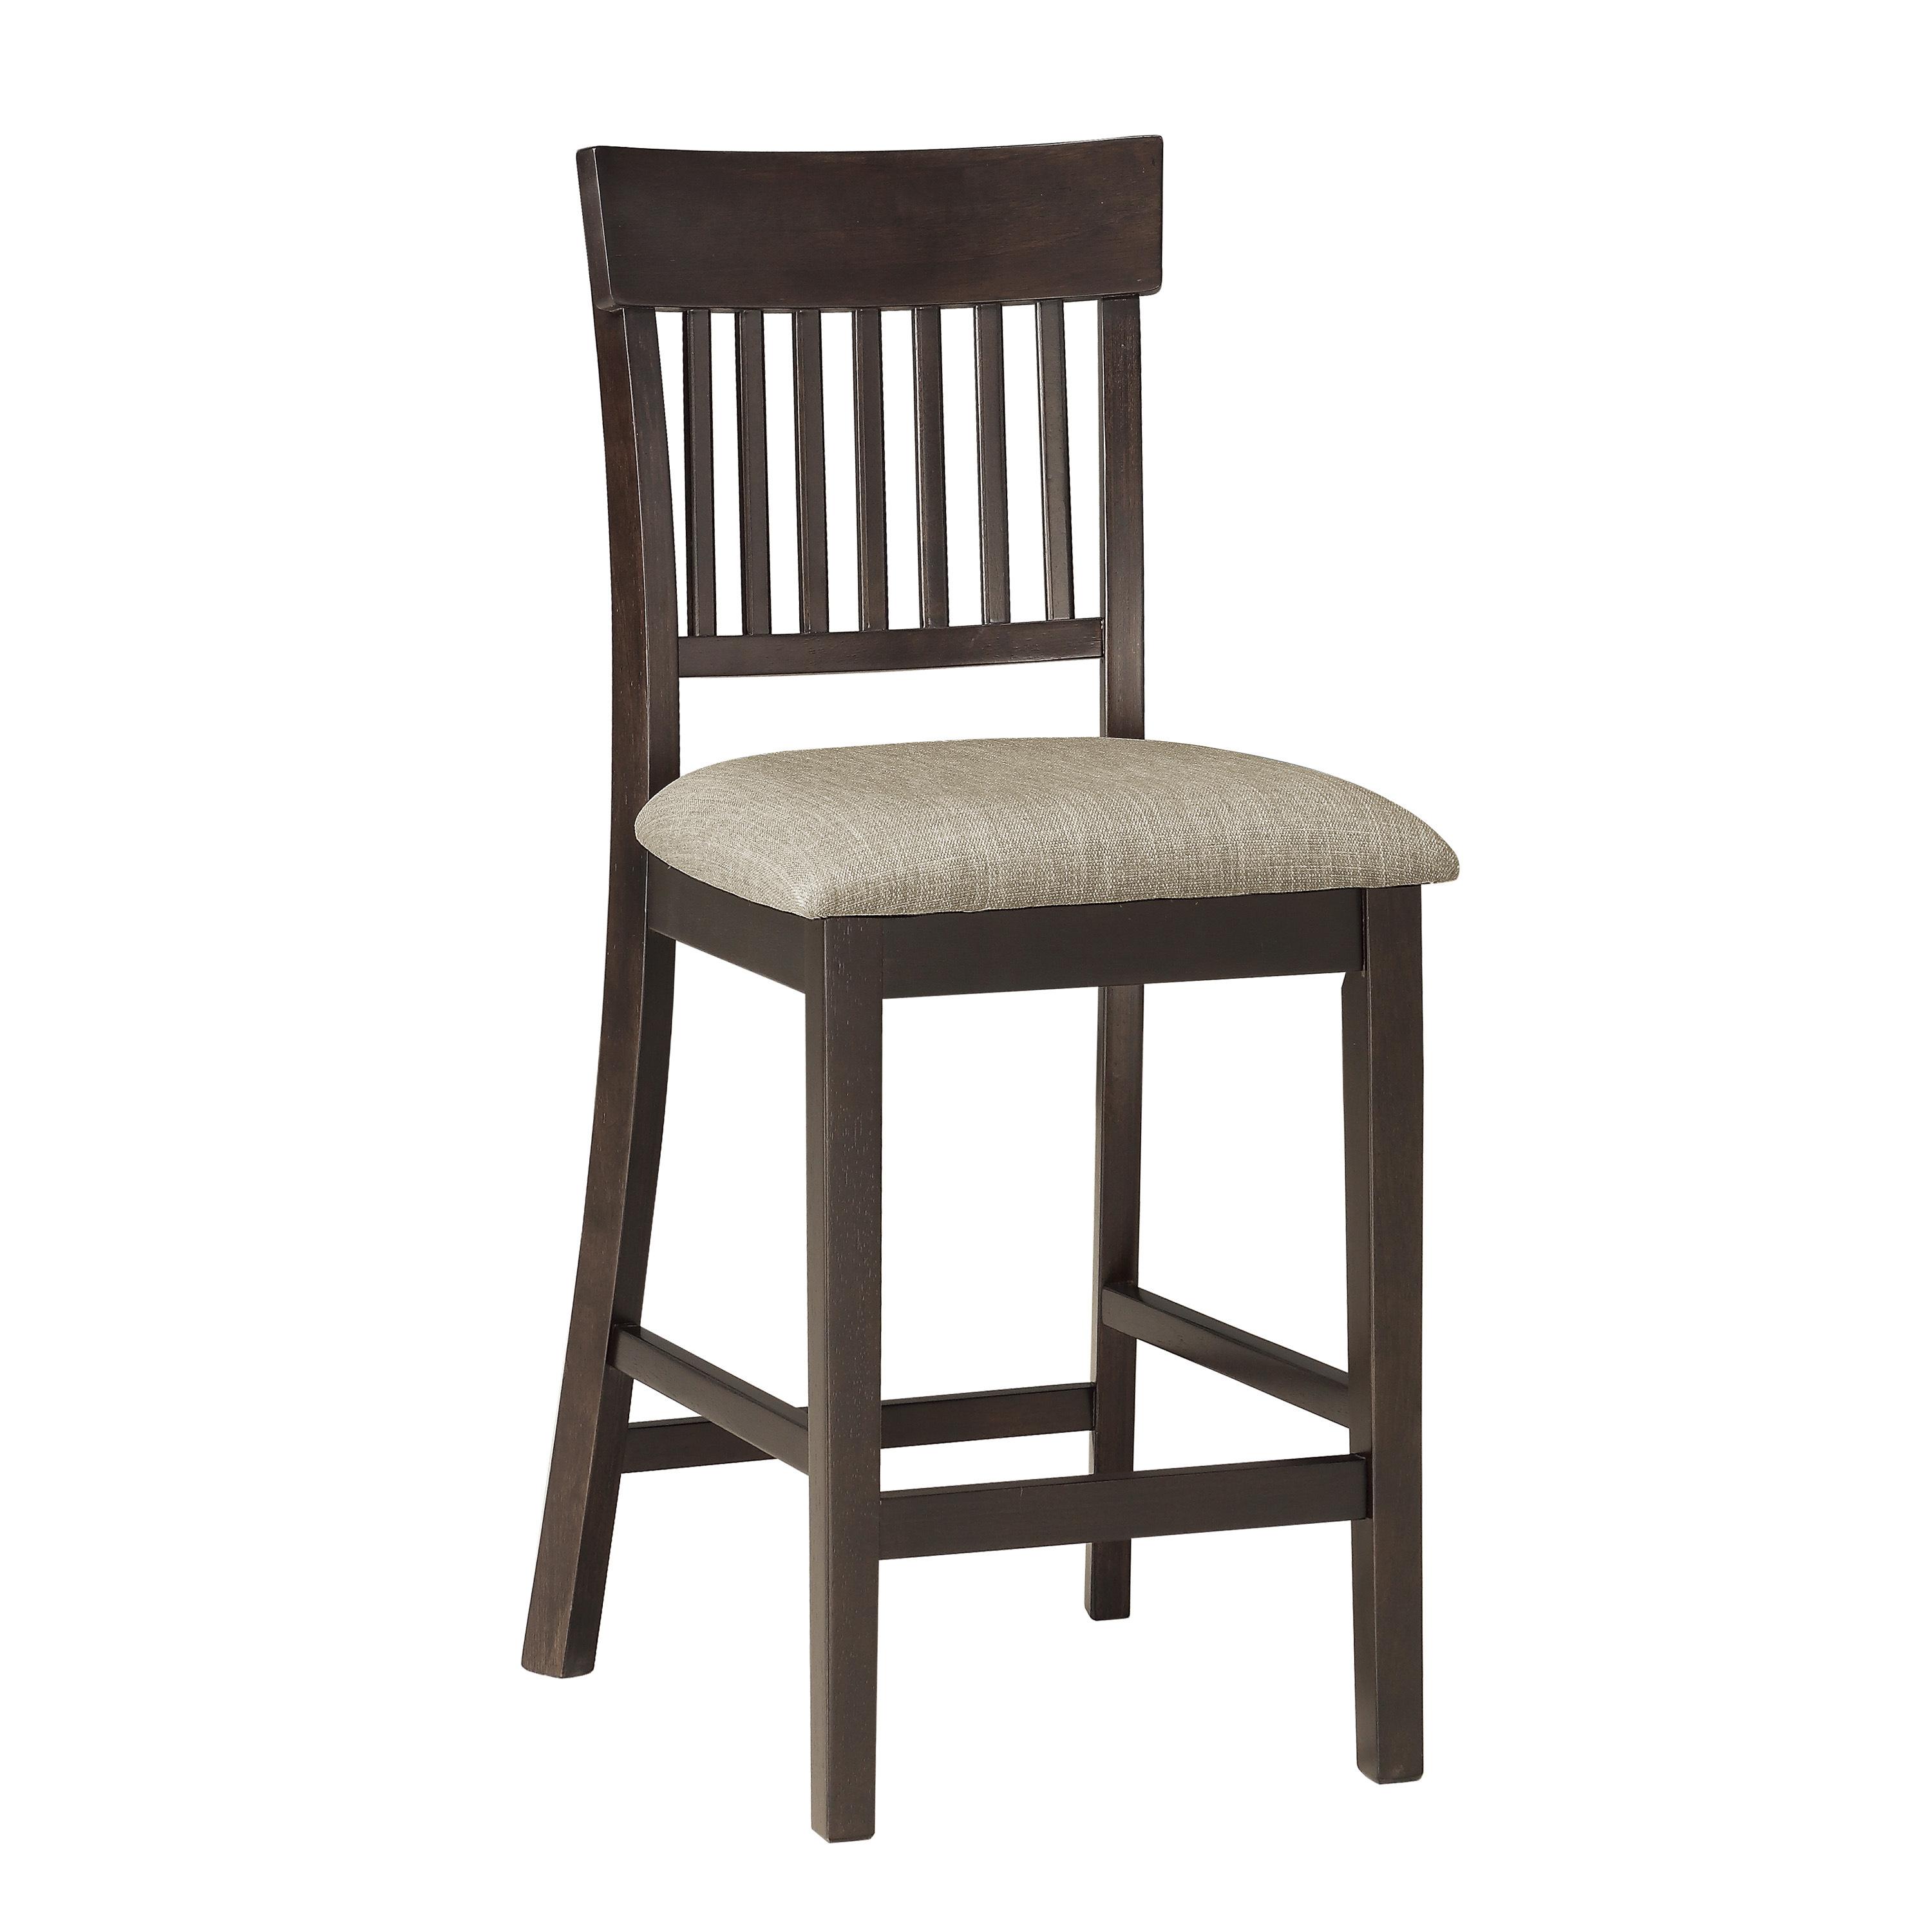 Rustic Counter Height Chair 5716-24S1 Balin 5716-24S1 in Dark Brown Polyester